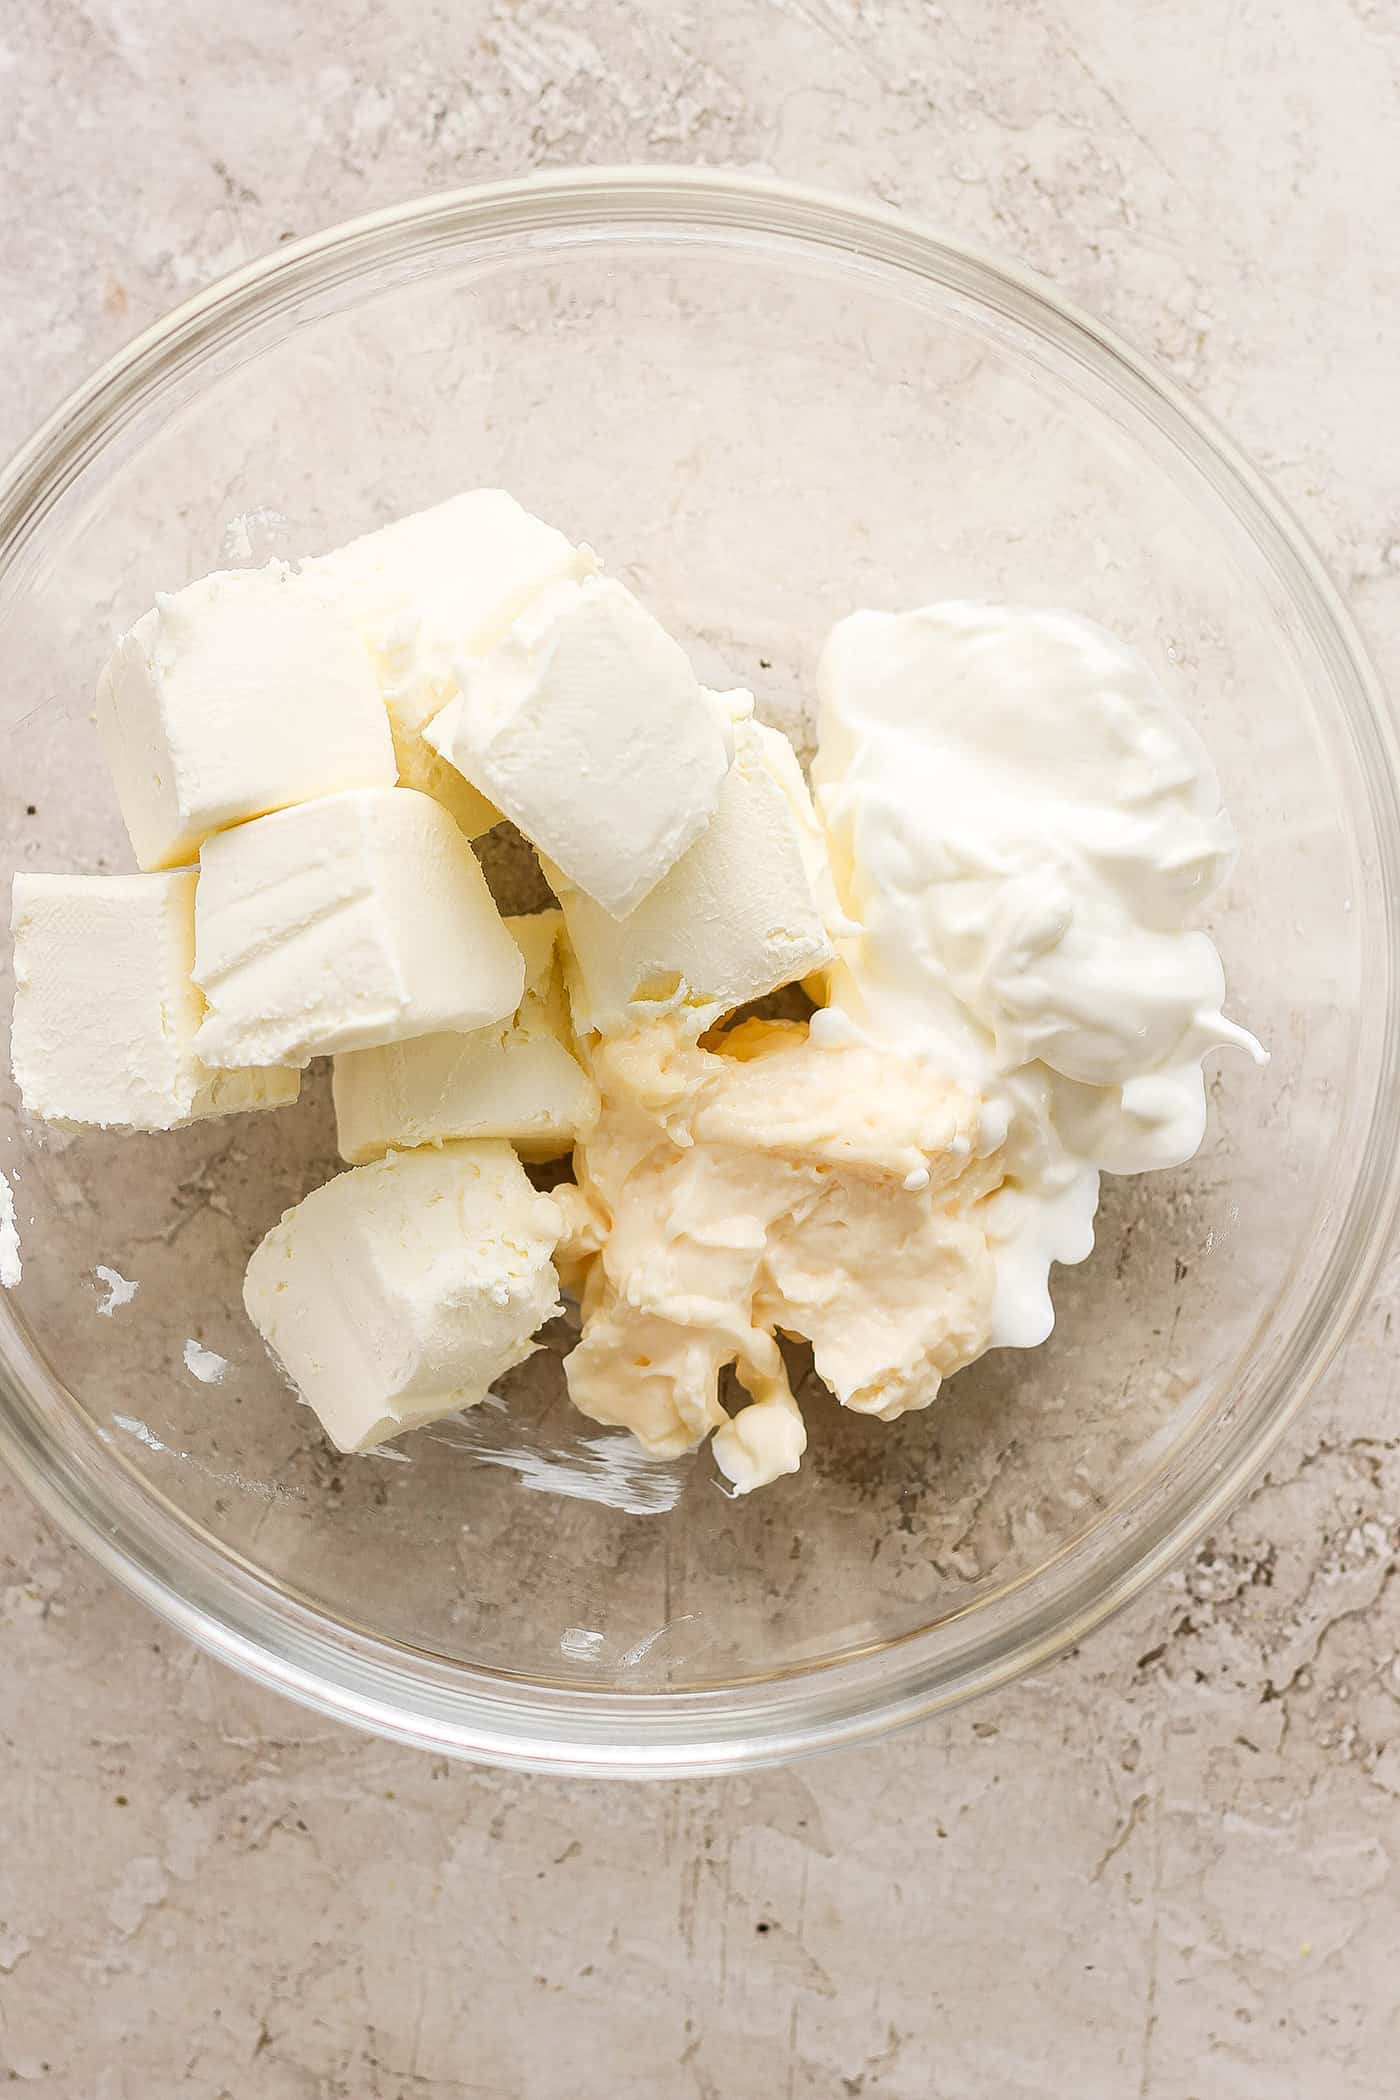 Chunks of cream cheese and sour cream are placed in a clear bowl.